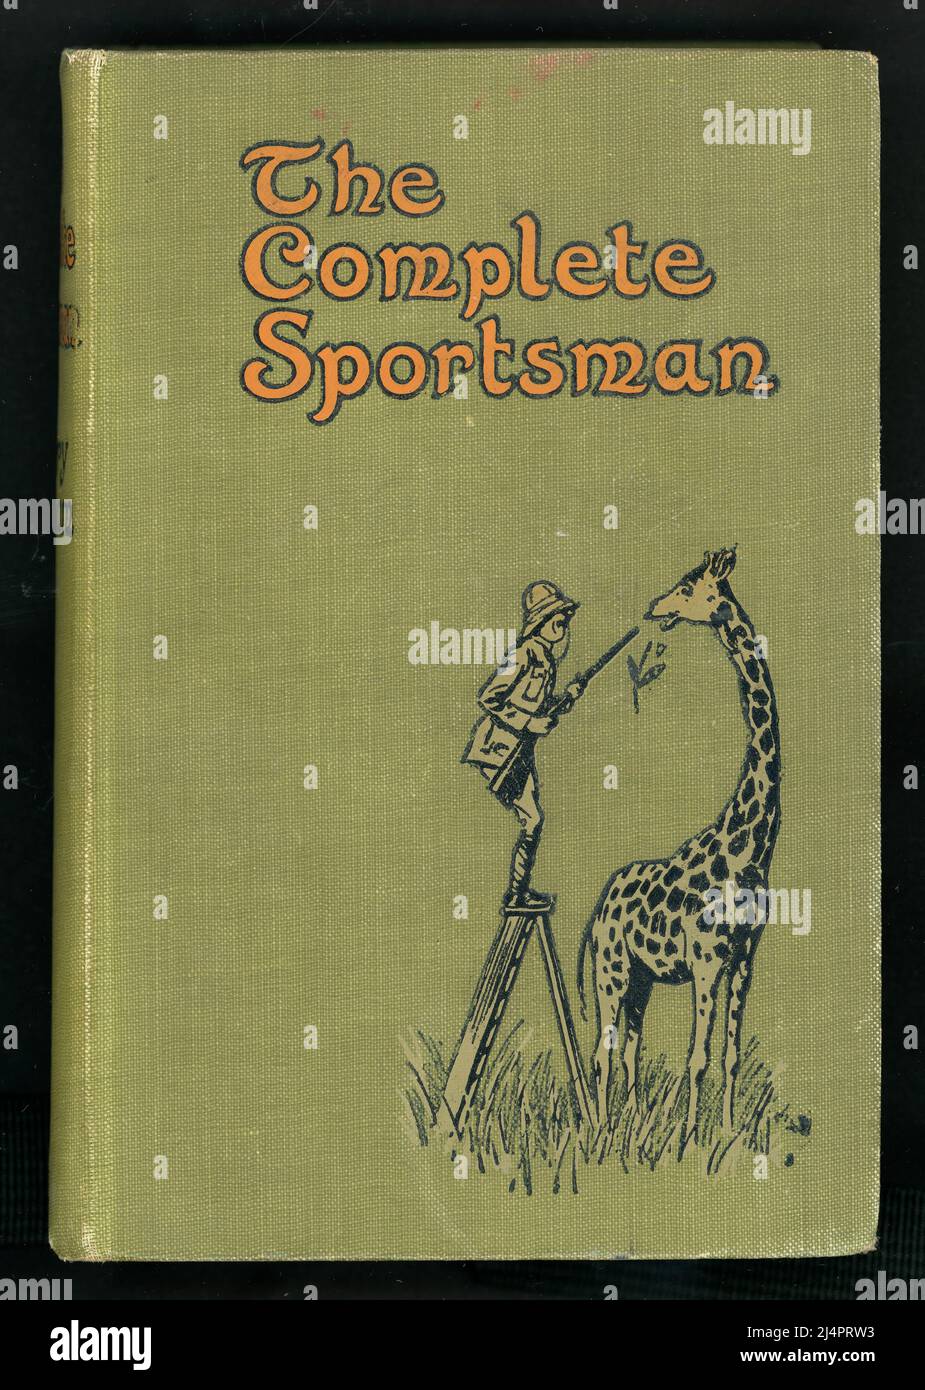 Original hardback first edition of The Complete Sportsman  (Compiled from the fictional sporting memoirs of Reginald Drake Biffin) with a cover of a big game hunter trying to shoot a giraffe.   Many of the articles published inside originally appeared in Punch, Pearson's Magazine, The Pall Mall Magazine, The Sphere, The Graphic and The Westminster Gazette. Published by Edward Arnold, London. 1914. Colonial edition., By Harry Graham. Illustrated by Lewis Baumer. 1914 Stock Photo